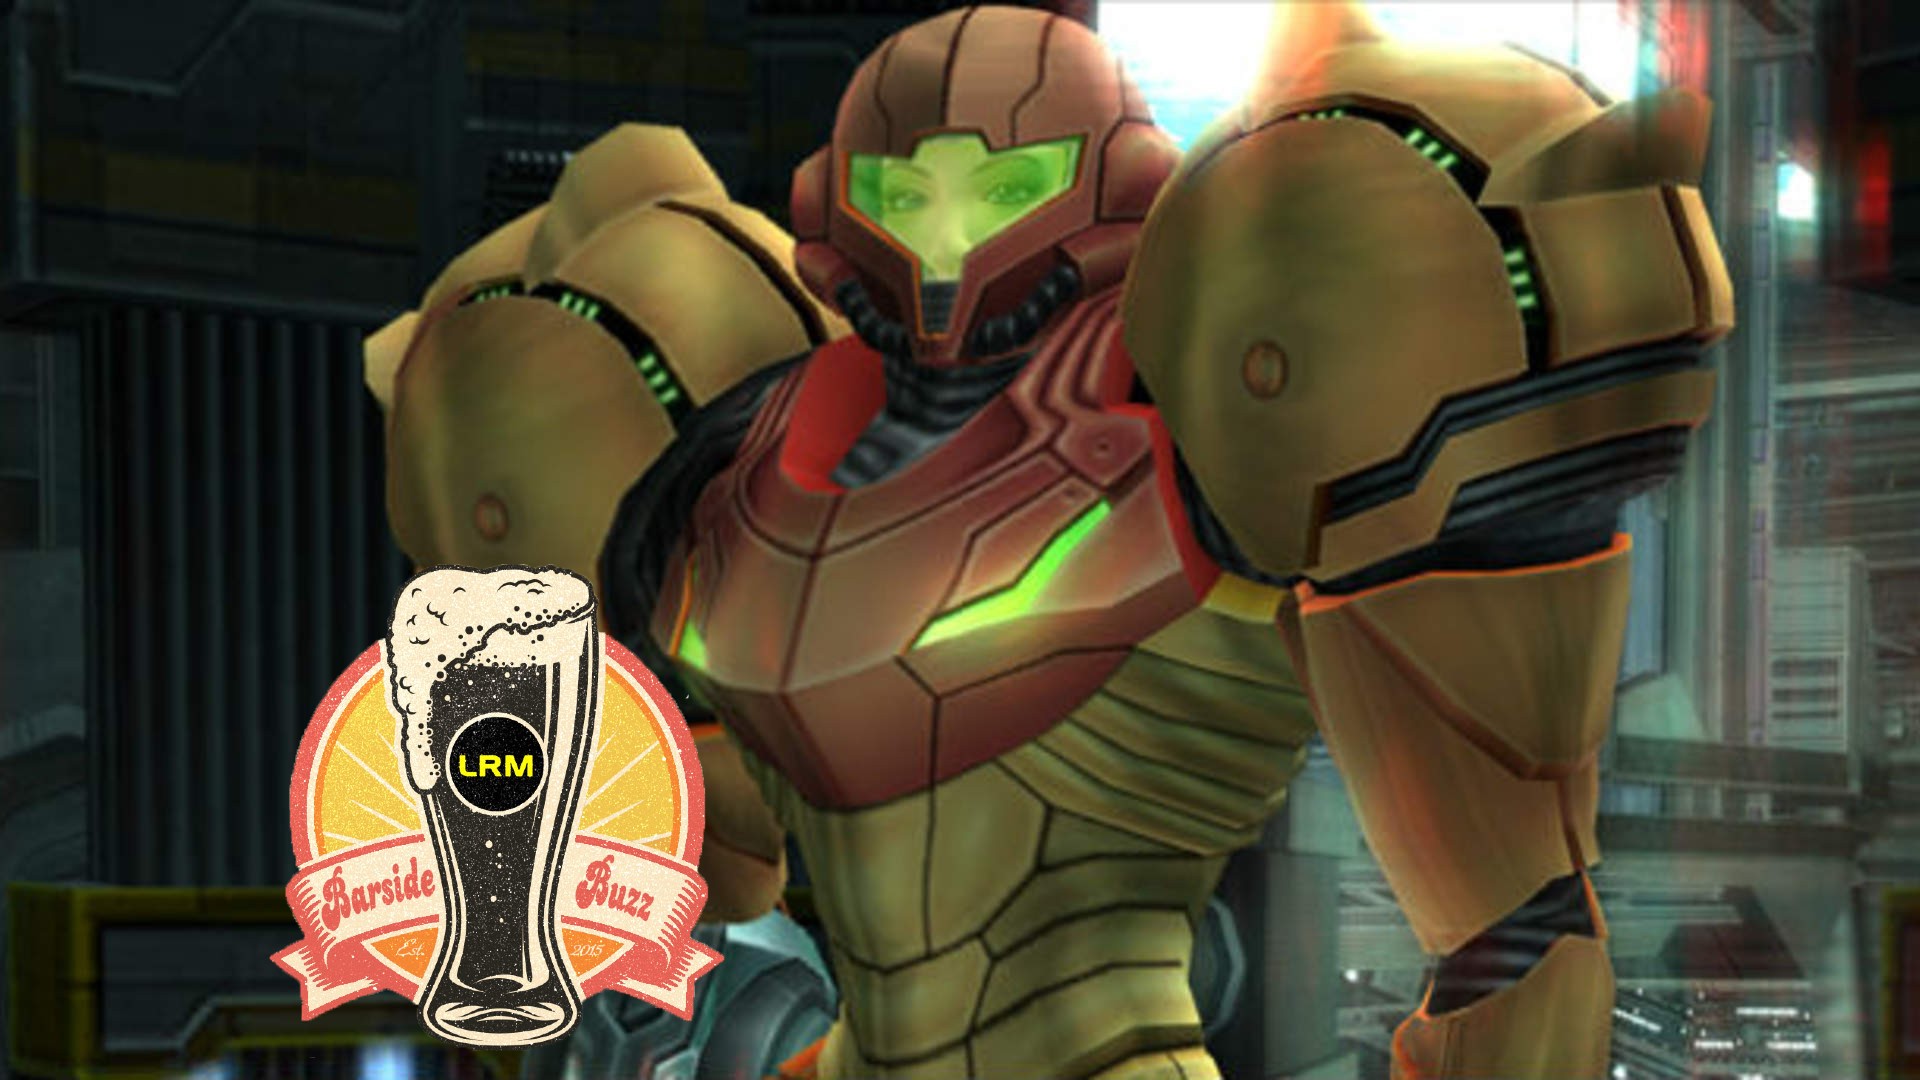 The Metroid Prime Trilogy To Hit Nintendo Switch This June? | LRM’s Barside Buzz